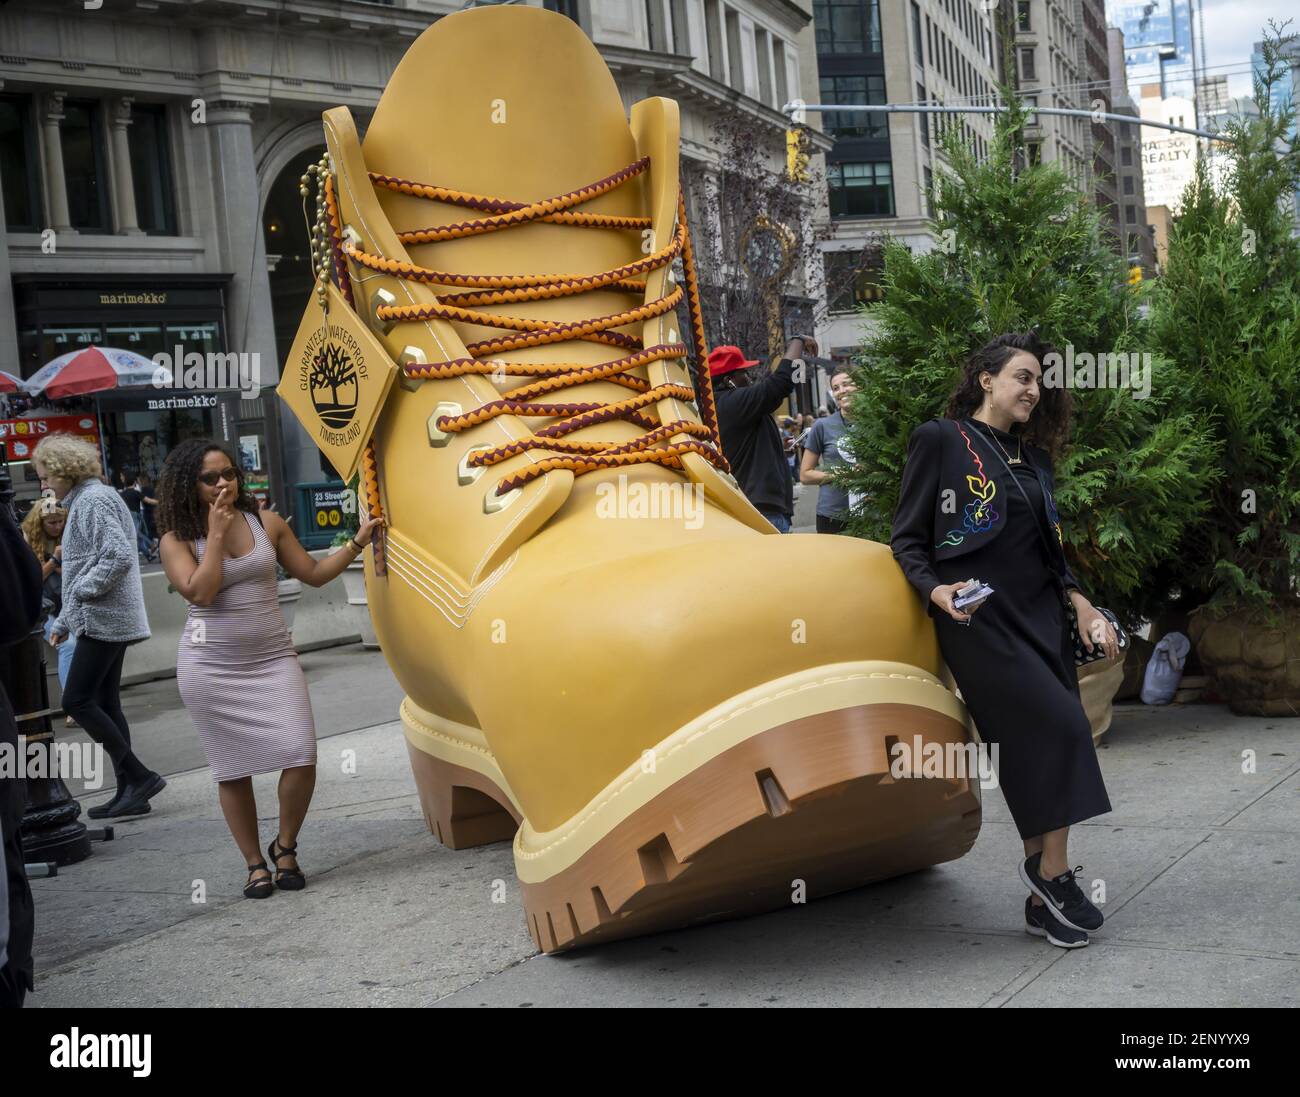 Visitors to Flatiron Plaza in New York on Friday, October 4, participate a branding event for VF Corp.'s Timberland boots and apparel brand. By taking a pledge to support the